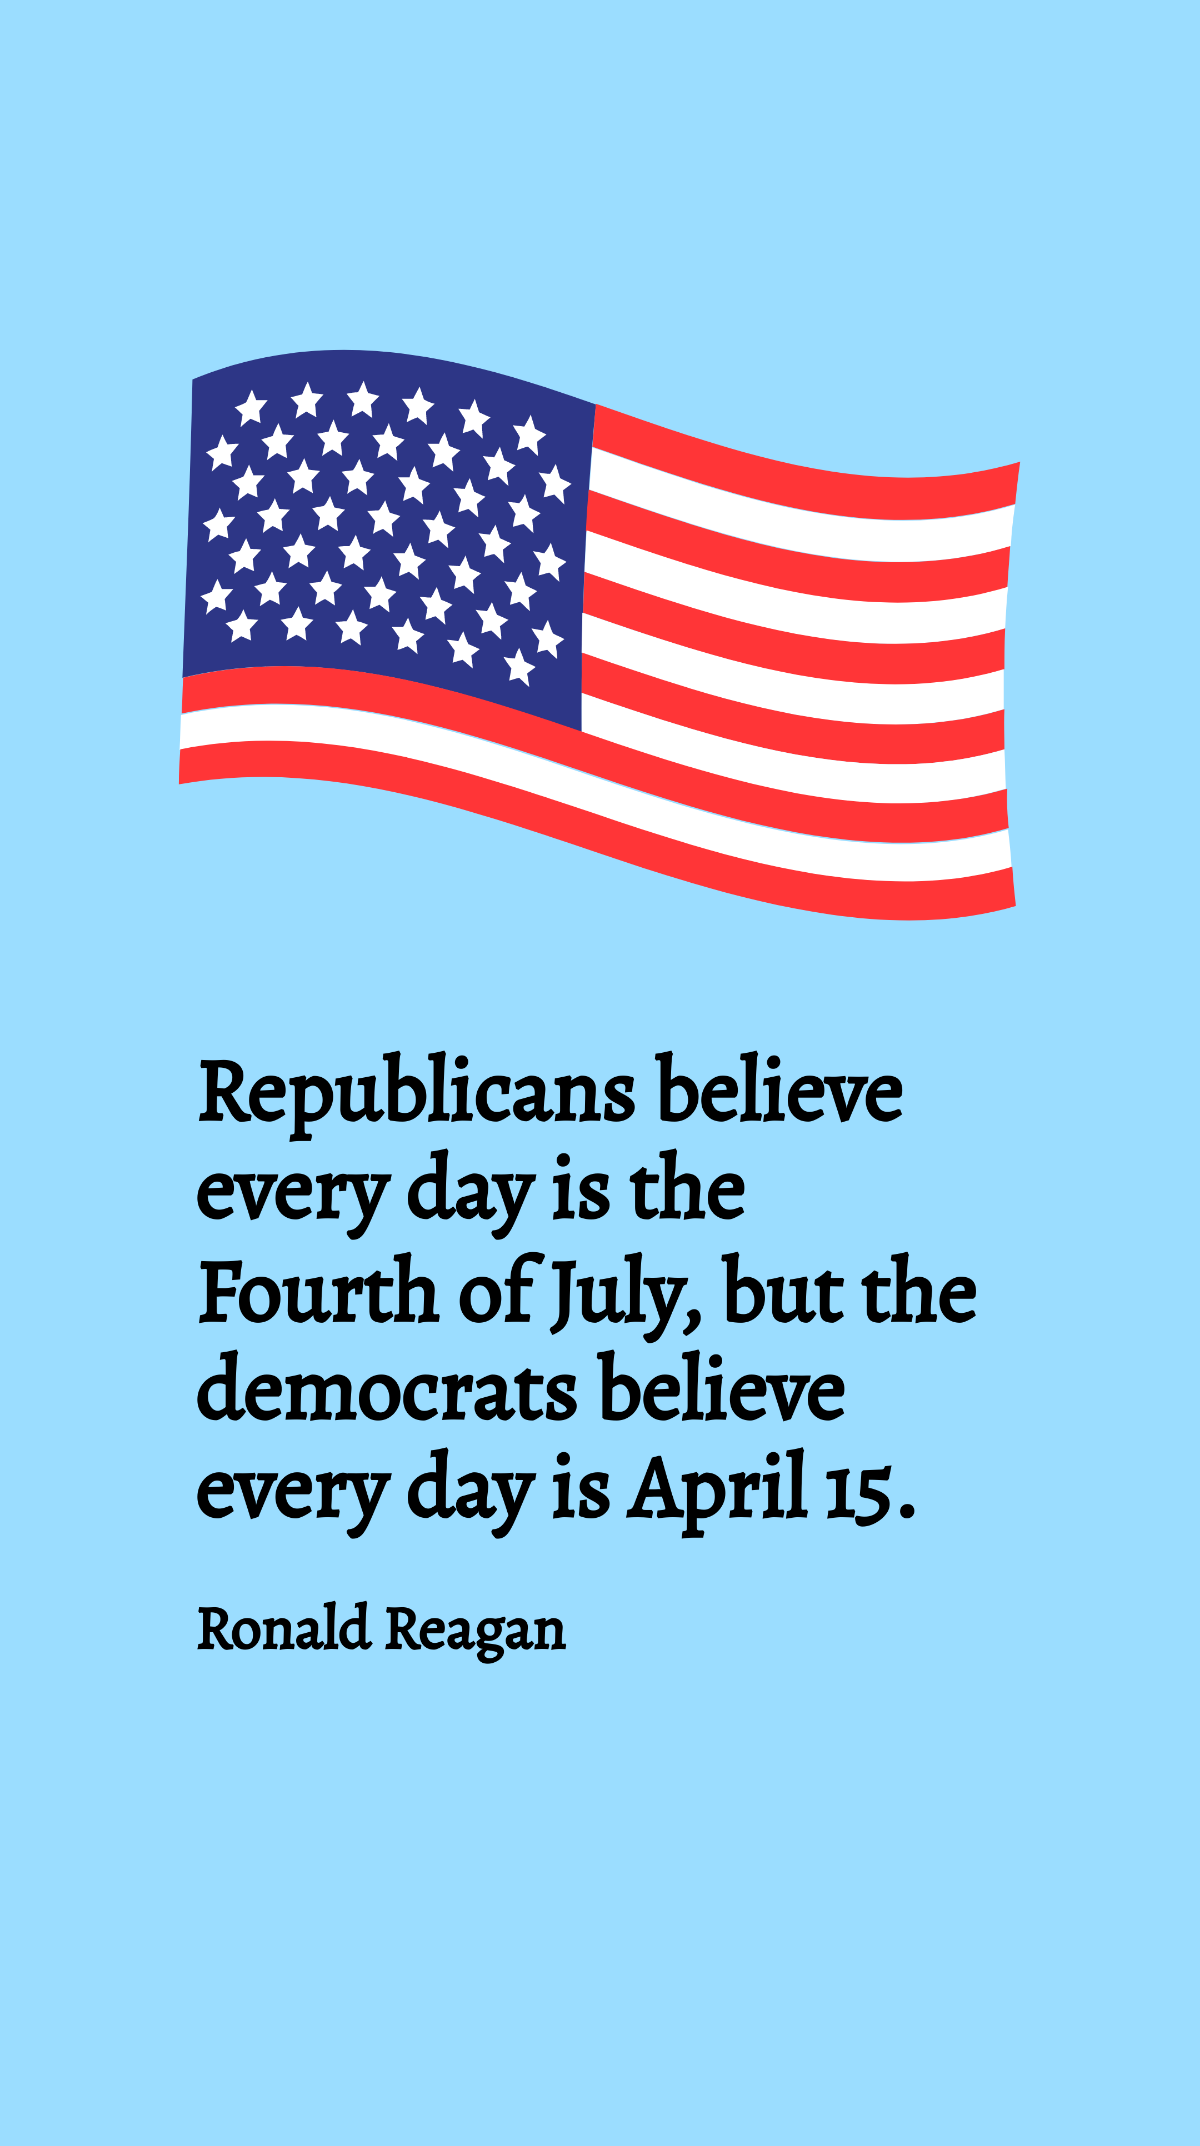 Ronald Reagan - Republicans believe every day is the Fourth of July, but the democrats believe every day is April 15. Template